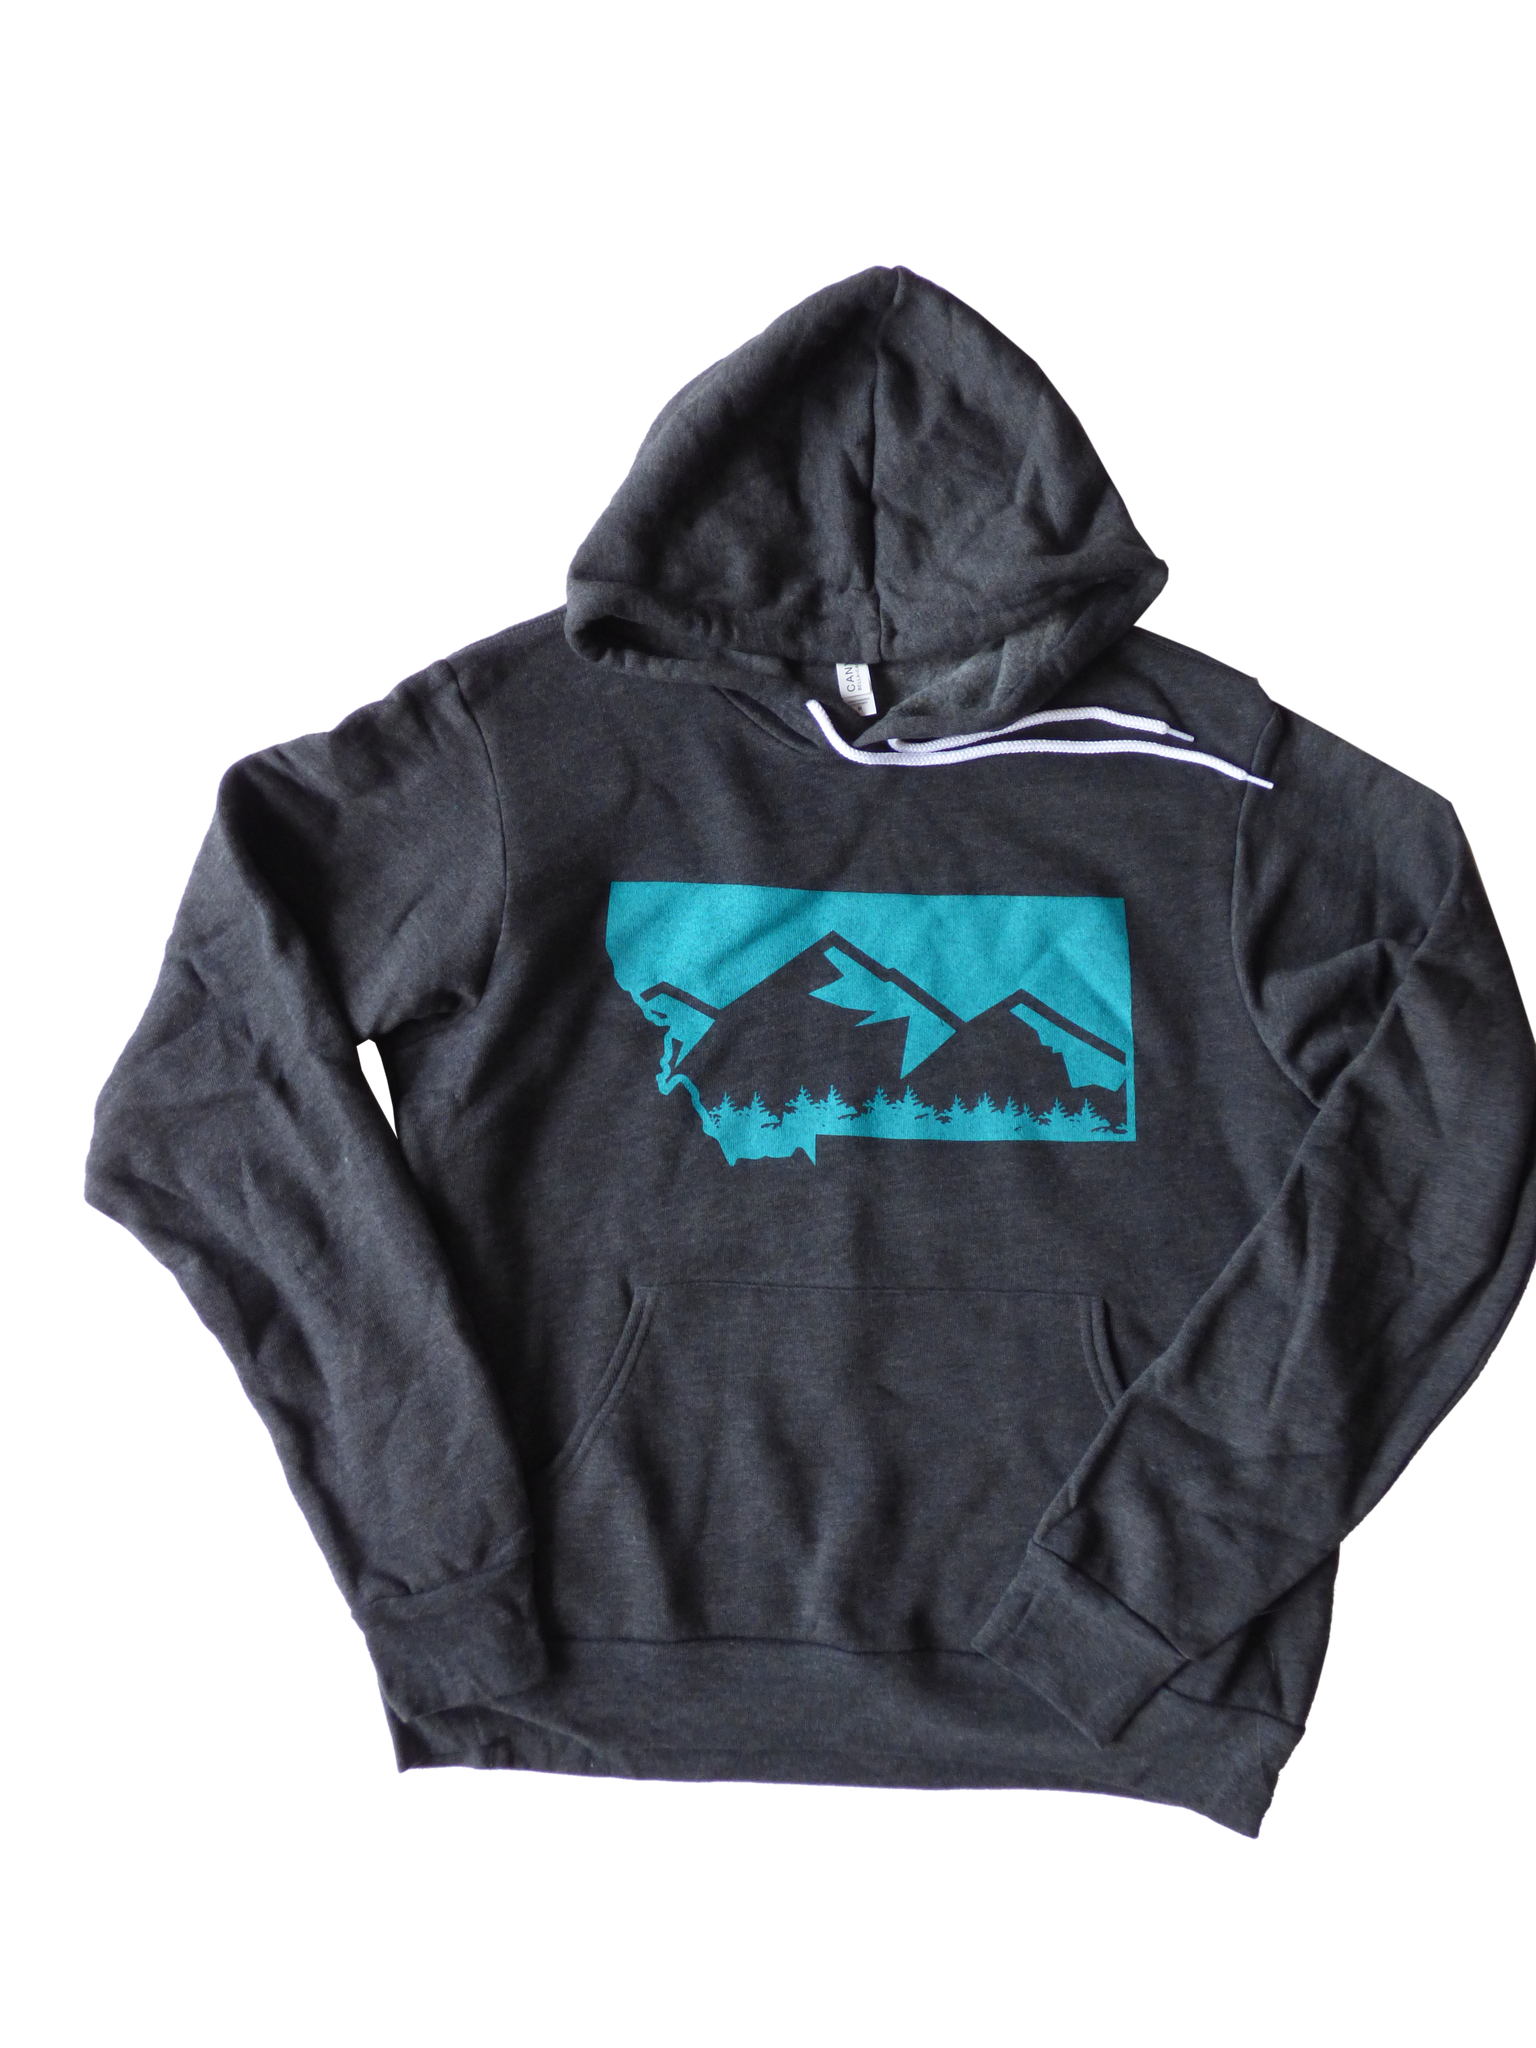 Charcoal and Teal Mountain Hoodie